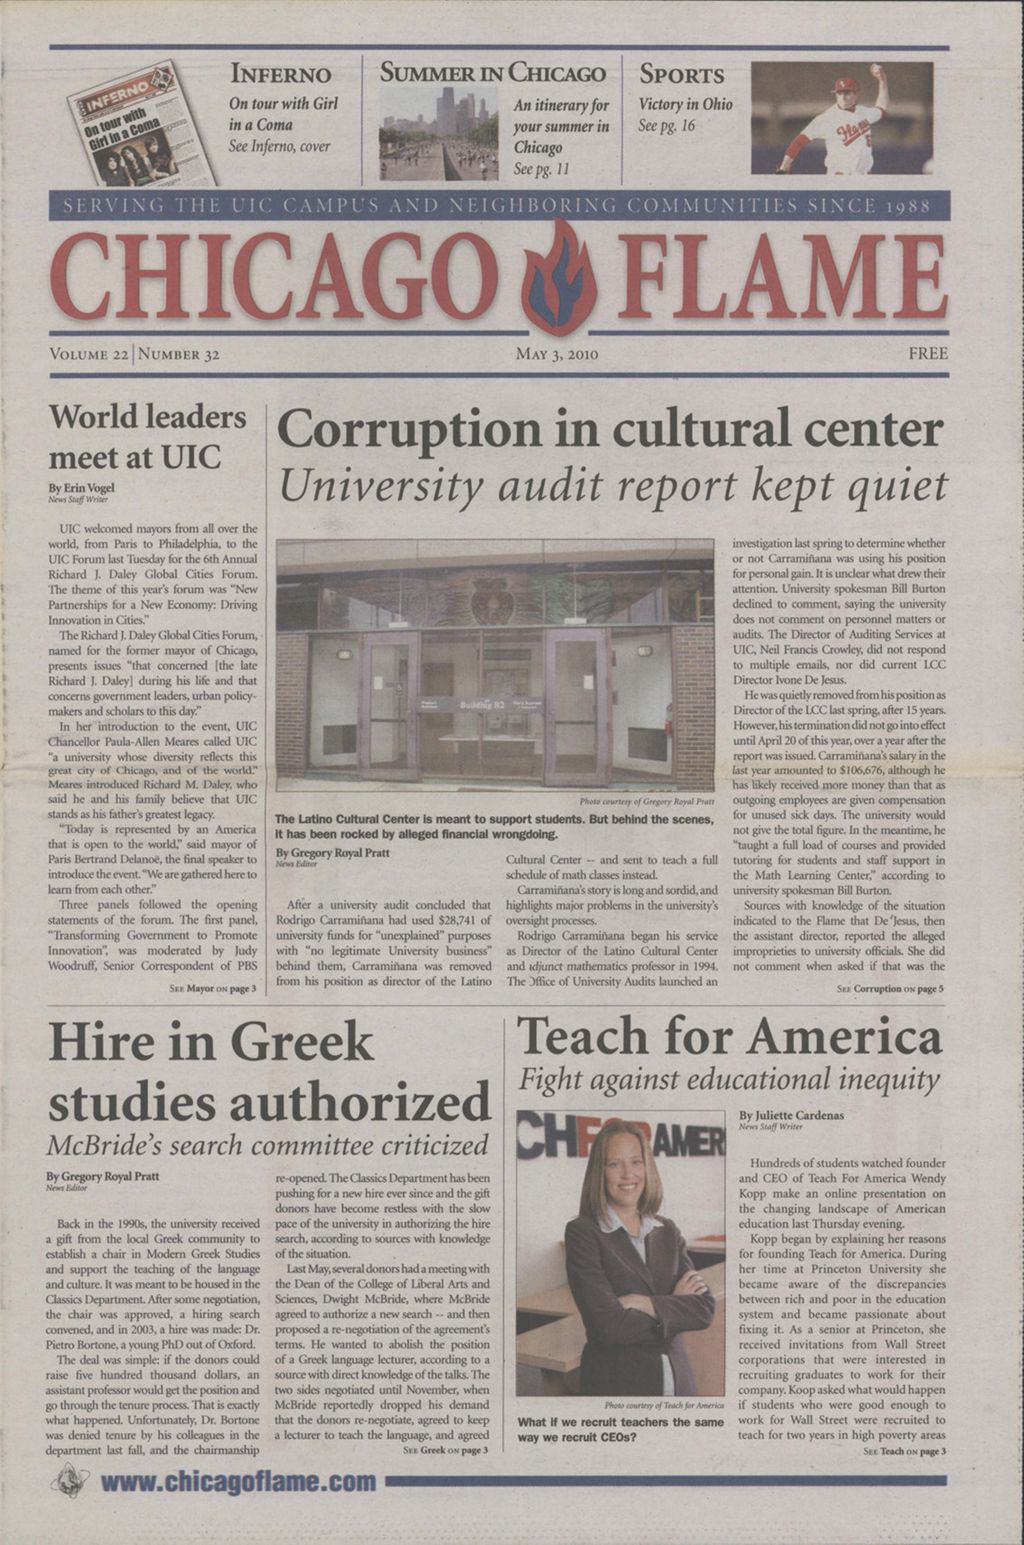 Chicago Flame (May 3, 2010)